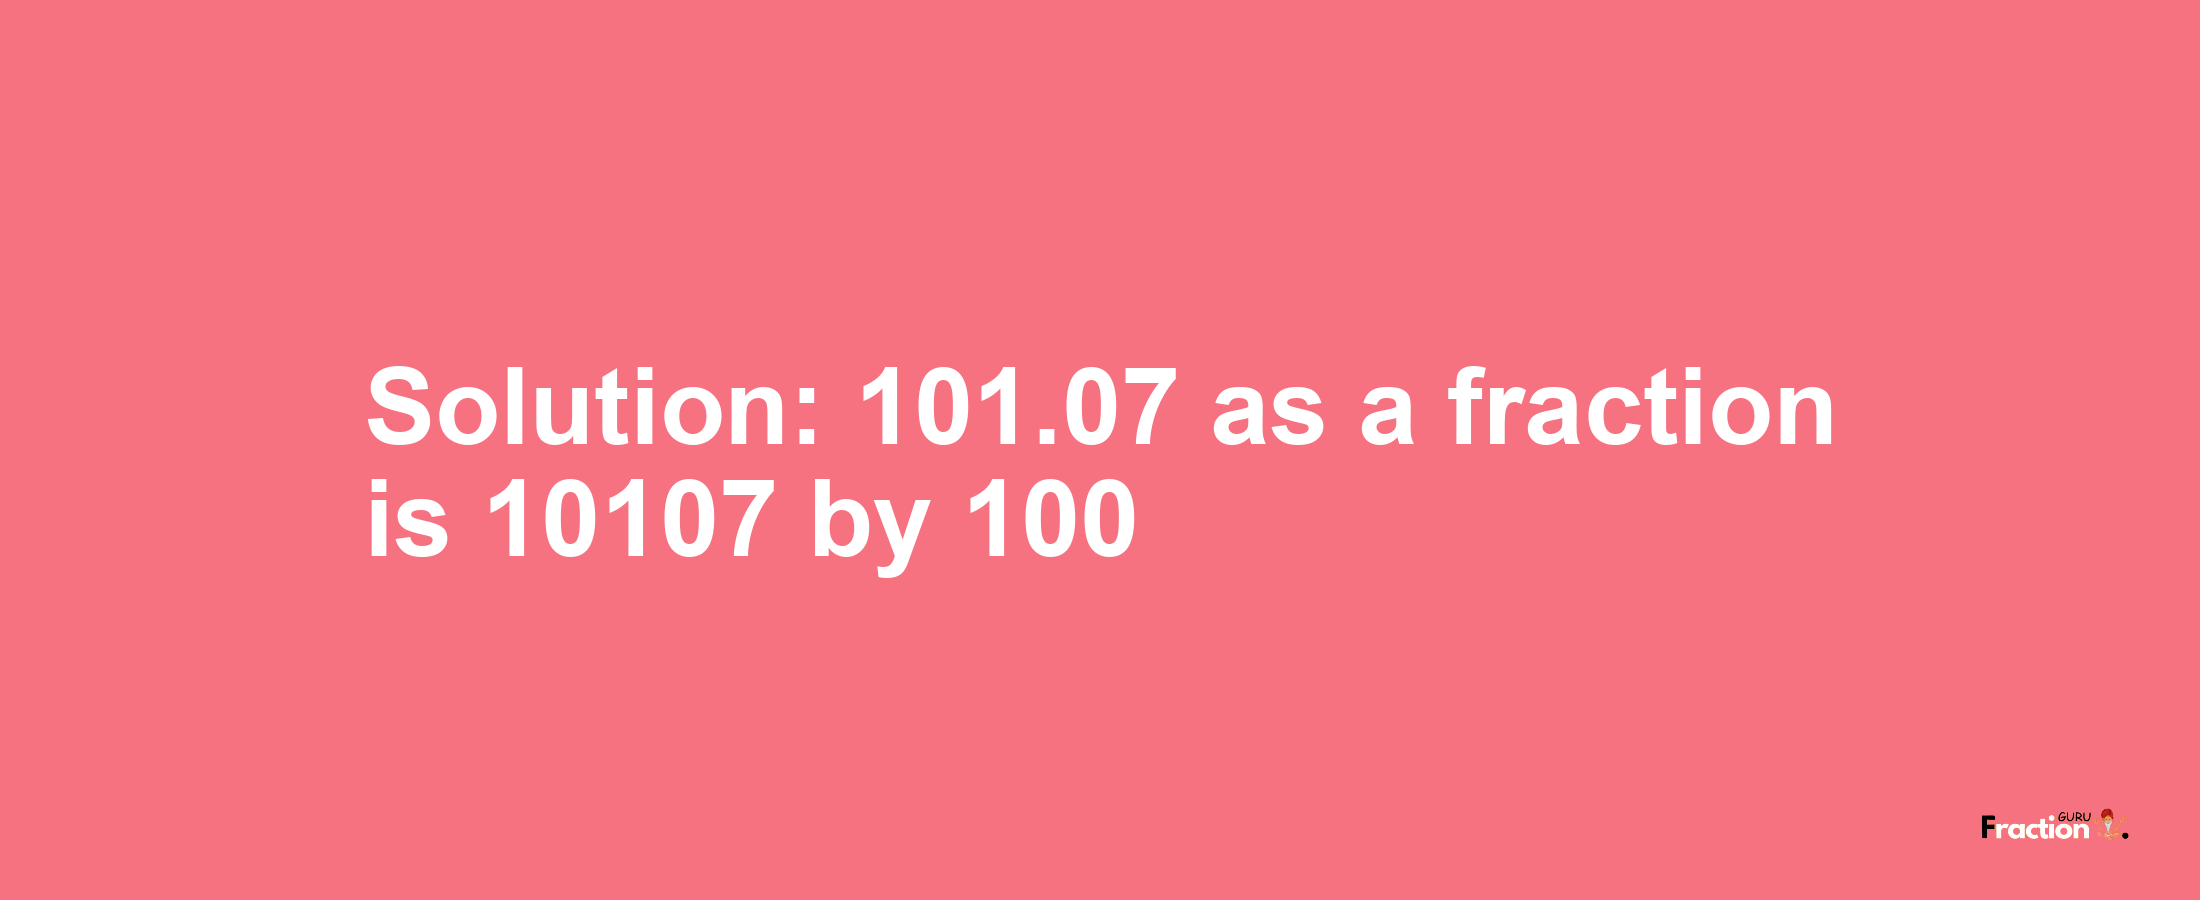 Solution:101.07 as a fraction is 10107/100